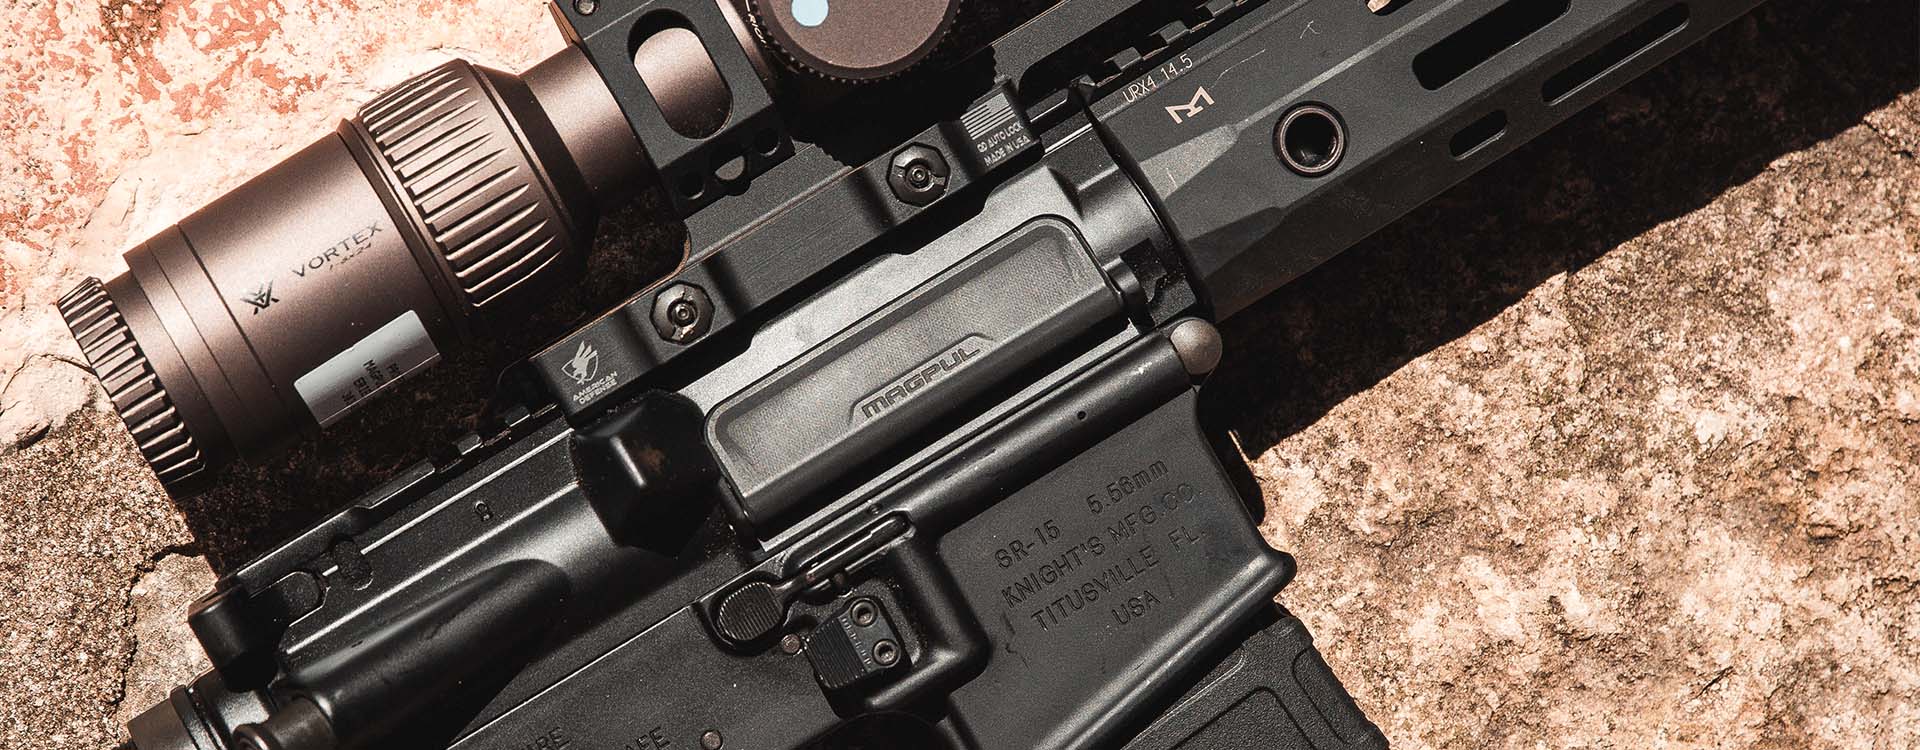 MAGPUL-AR15-M16-Enhanced-Ejection-Port-Cover-MAG1206-BLK_banner